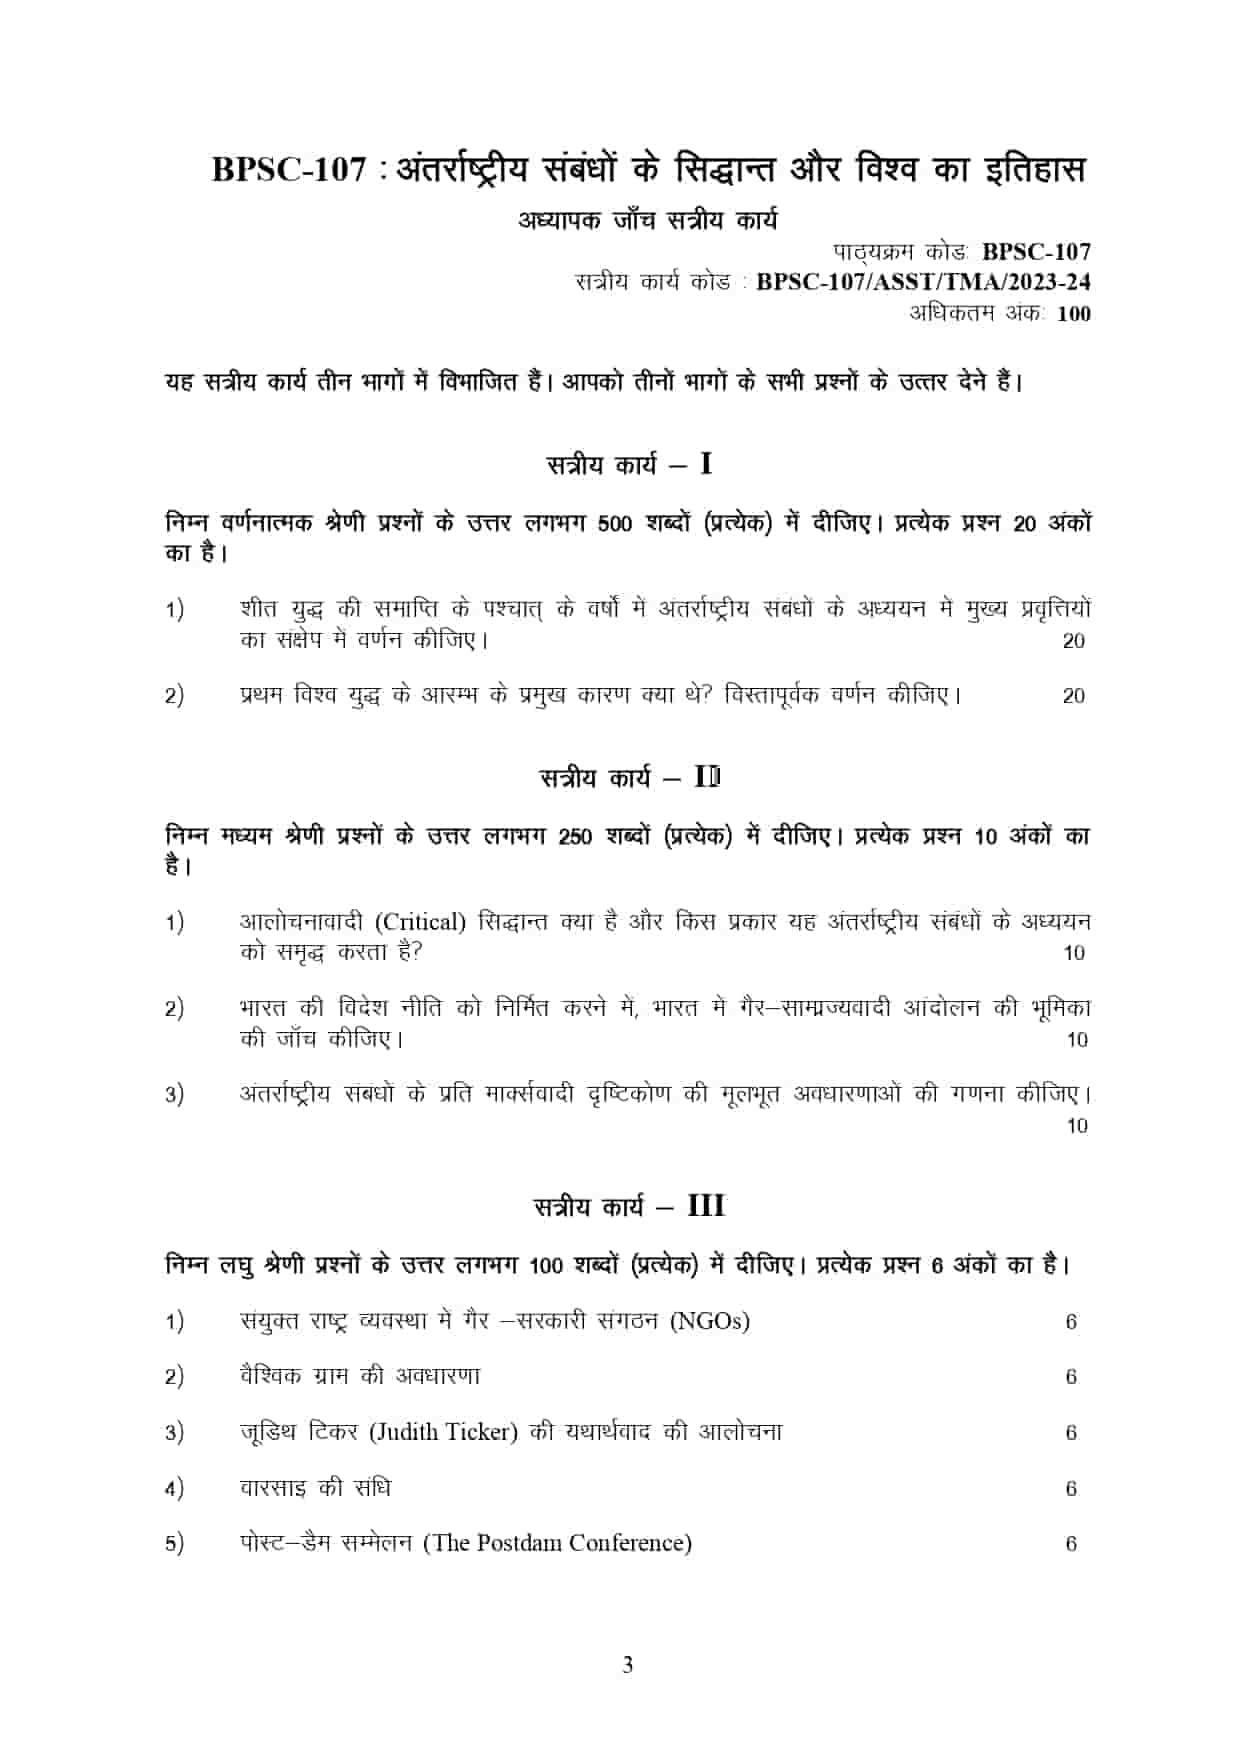 IGNOU BPSC 107 HINDI SOLVED ASSIGNMENT 2023-24